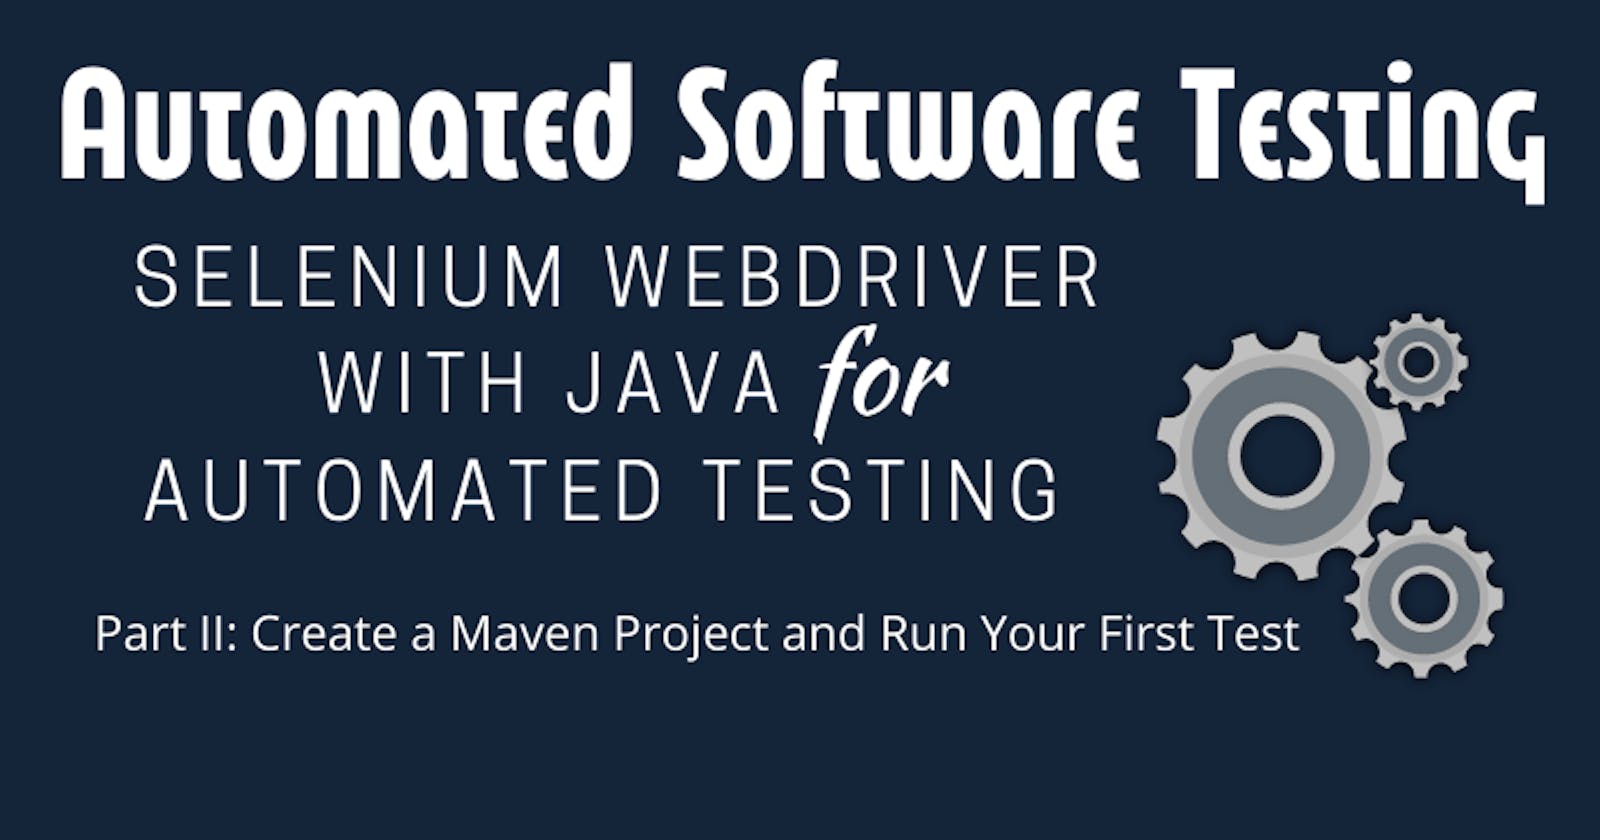 Using Selenium WebDriver With Java for Automated Testing: Part II